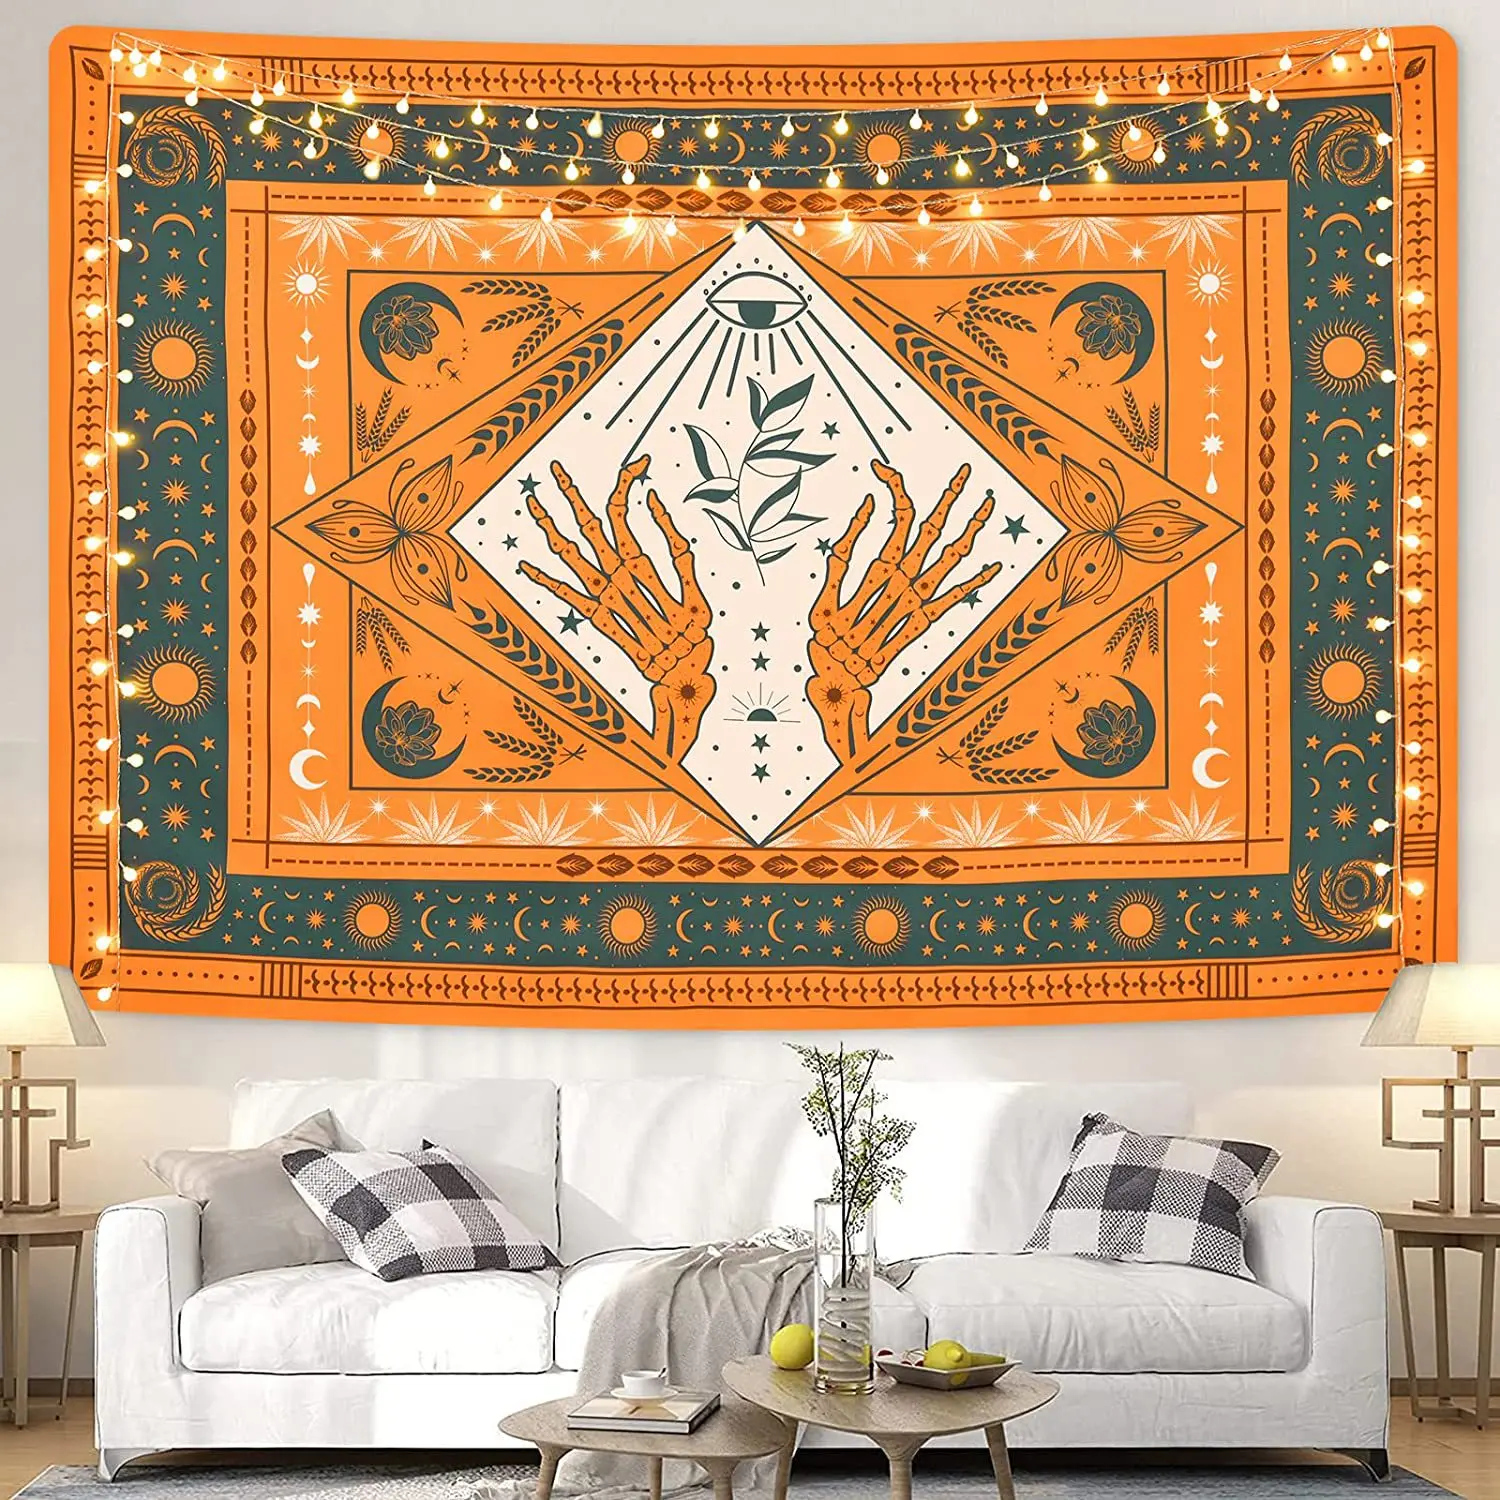 Tapestry House Decoration Tapestry Wall Hanging Bohemian Curtains Gothic Home Decor Dorm Room Essentials Tapiz De Pared images - 6